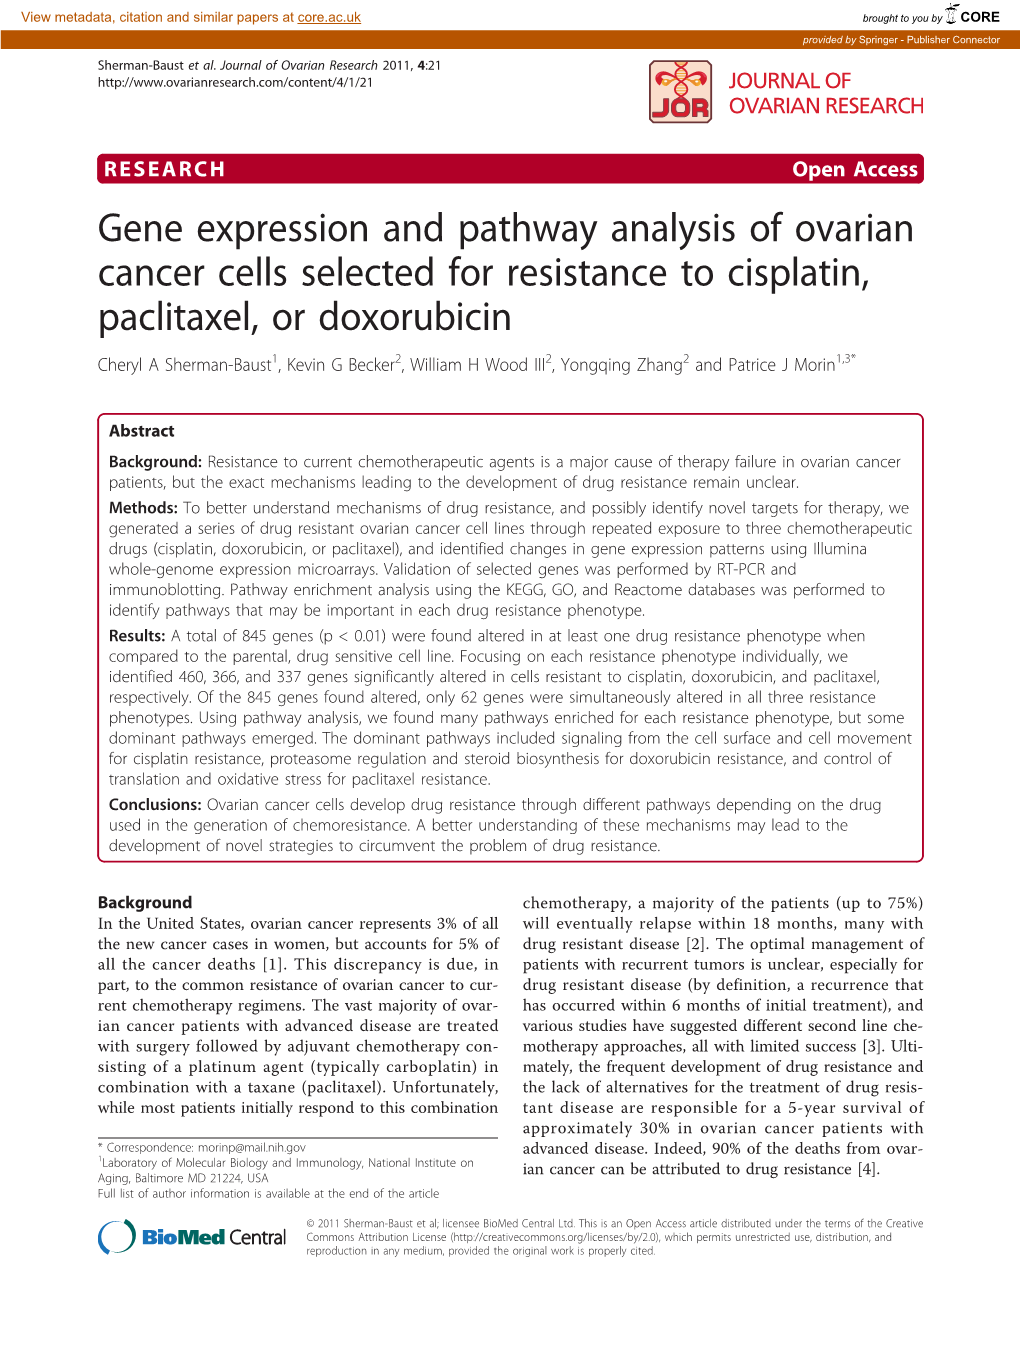 Gene Expression and Pathway Analysis of Ovarian Cancer Cells